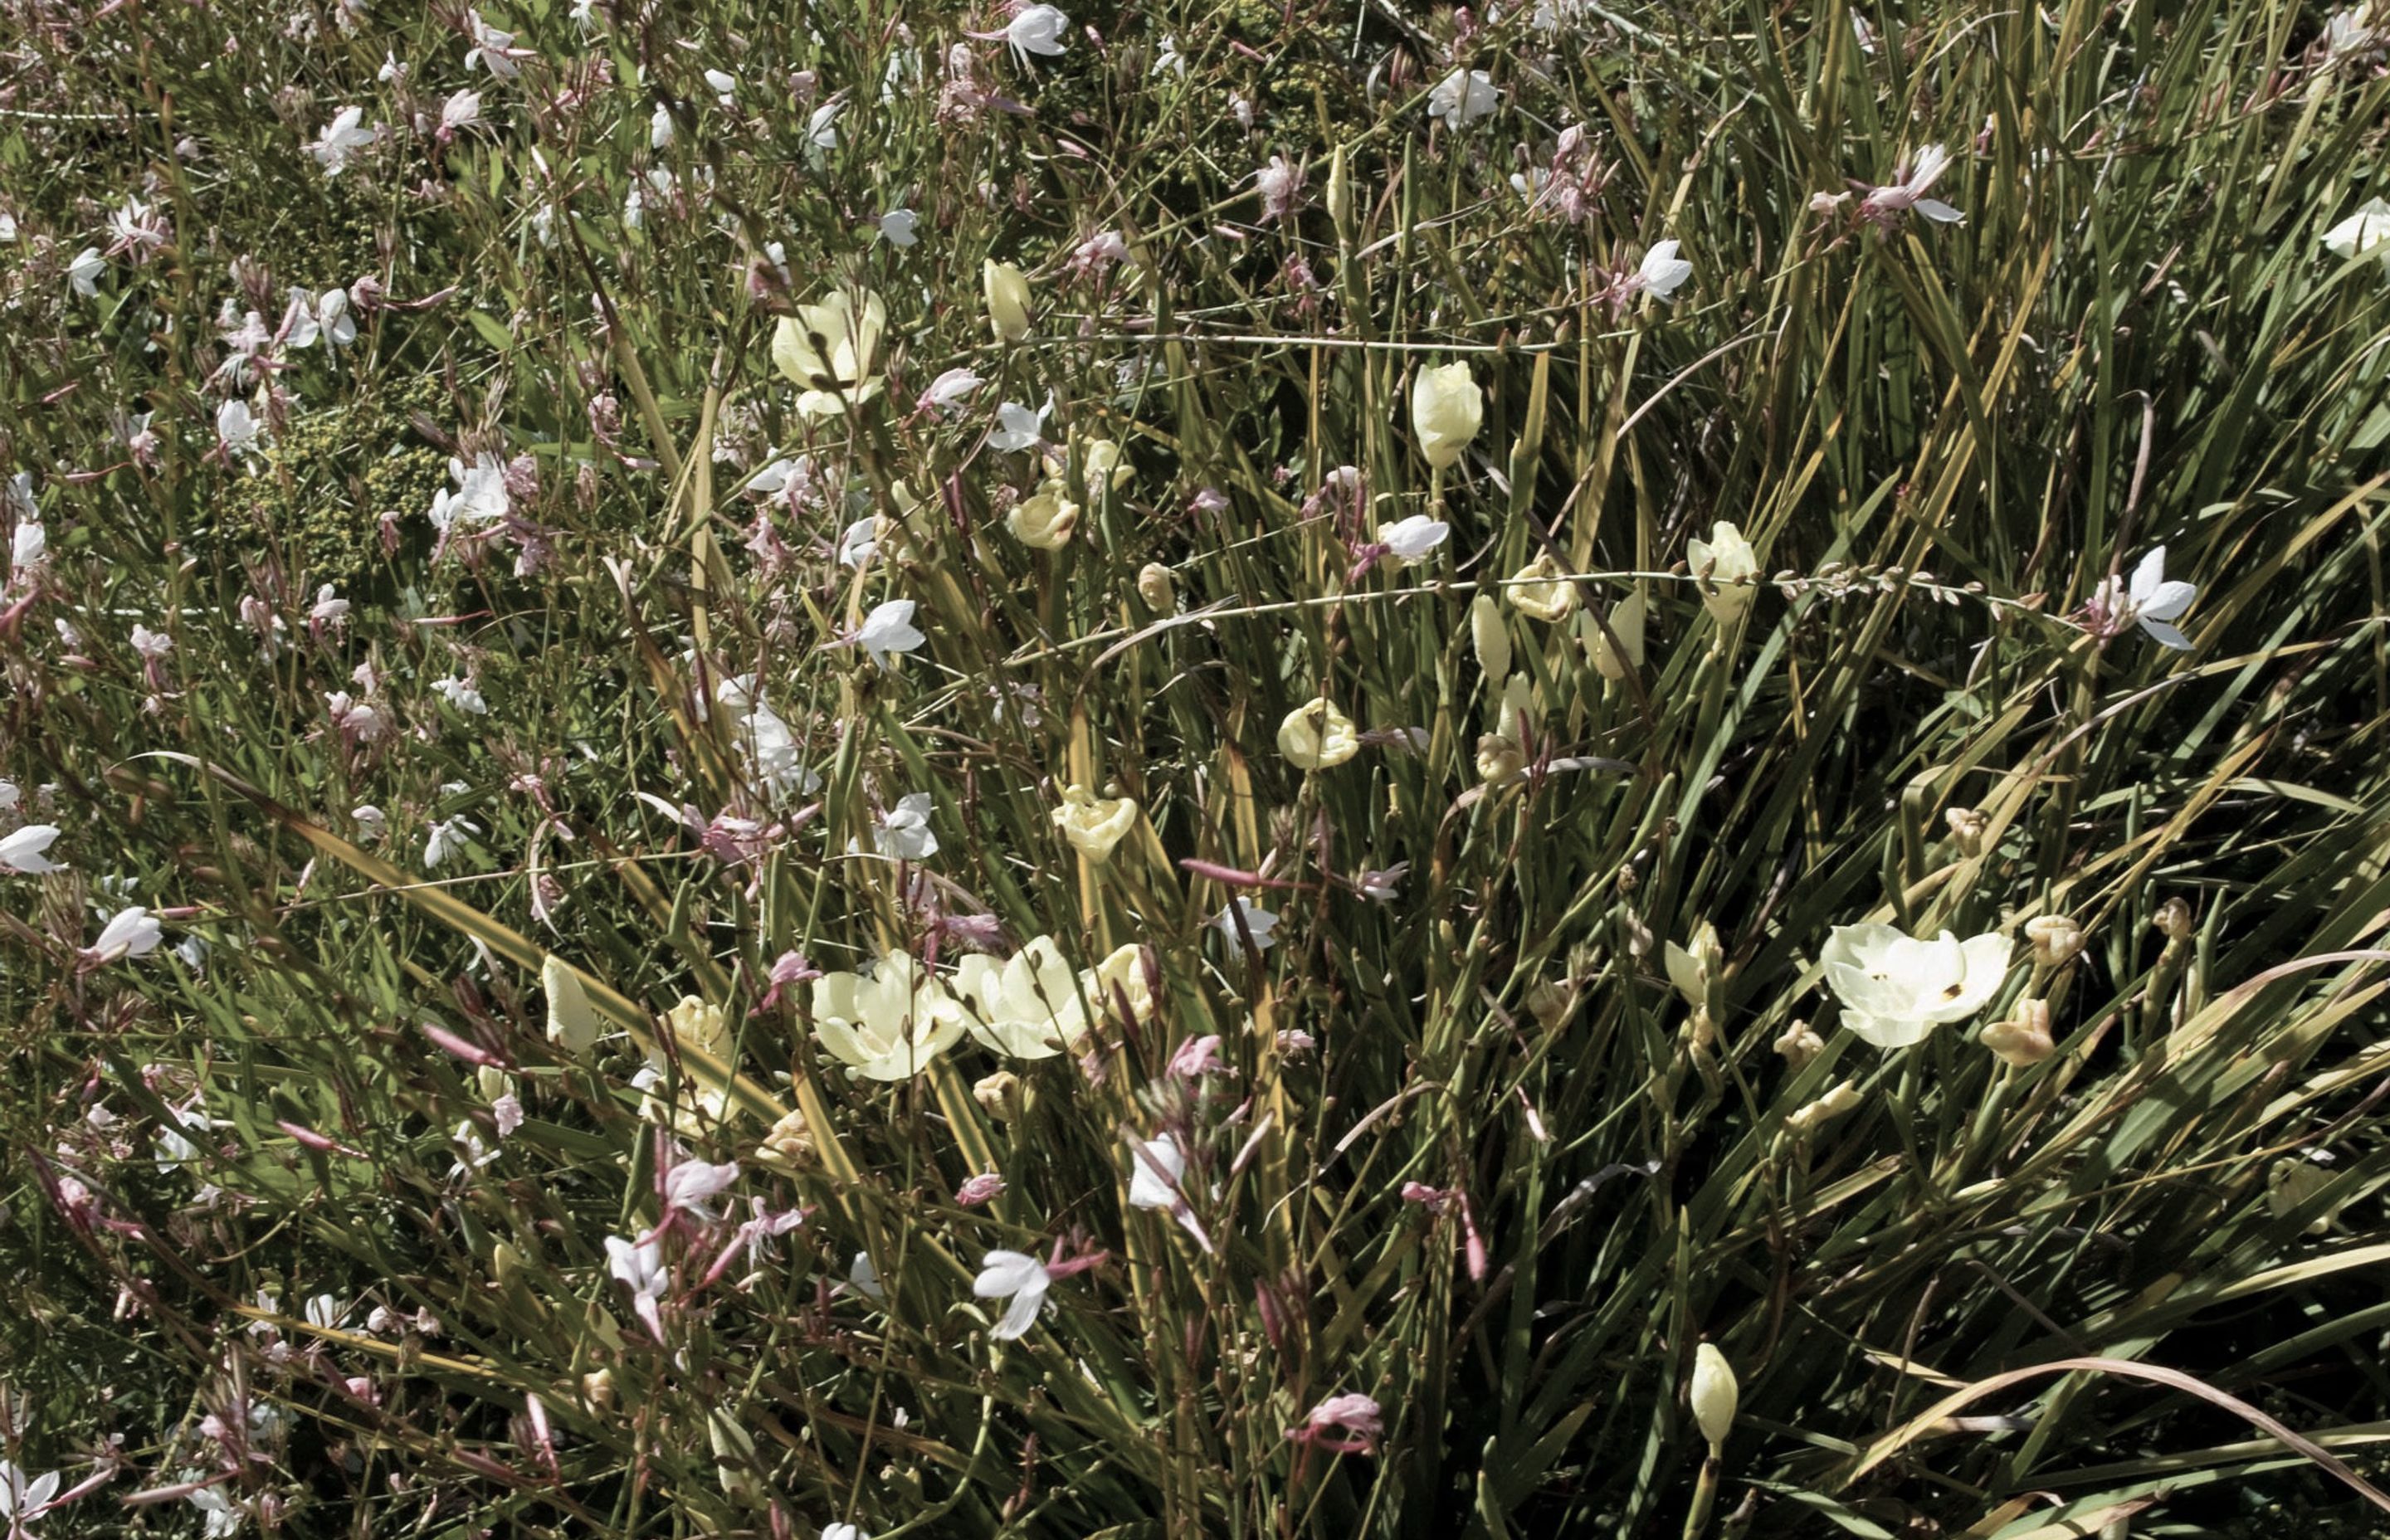 Detail of meadow planting with dietes and gaura